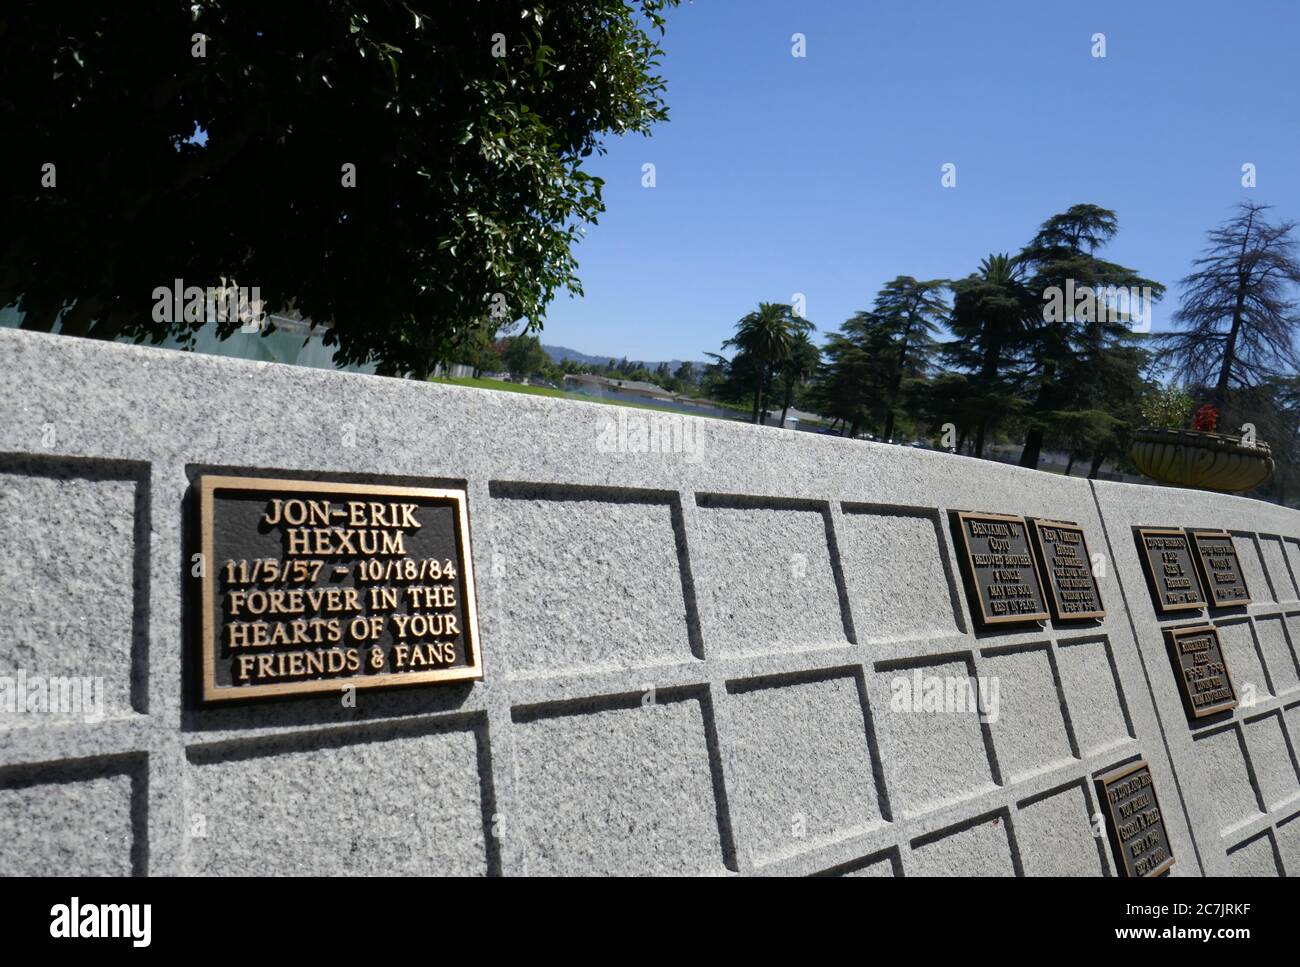 North Hollywood, California, USA 17th July 2020 A general view of atmosphere of Jon-Erik Hexum's Cenotaph and Memorial on July 17, 2020 at Valhalla Memorial Park in North Hollywood, California, USA. Photo by Barry King/Alamy Stock Photo Stock Photo